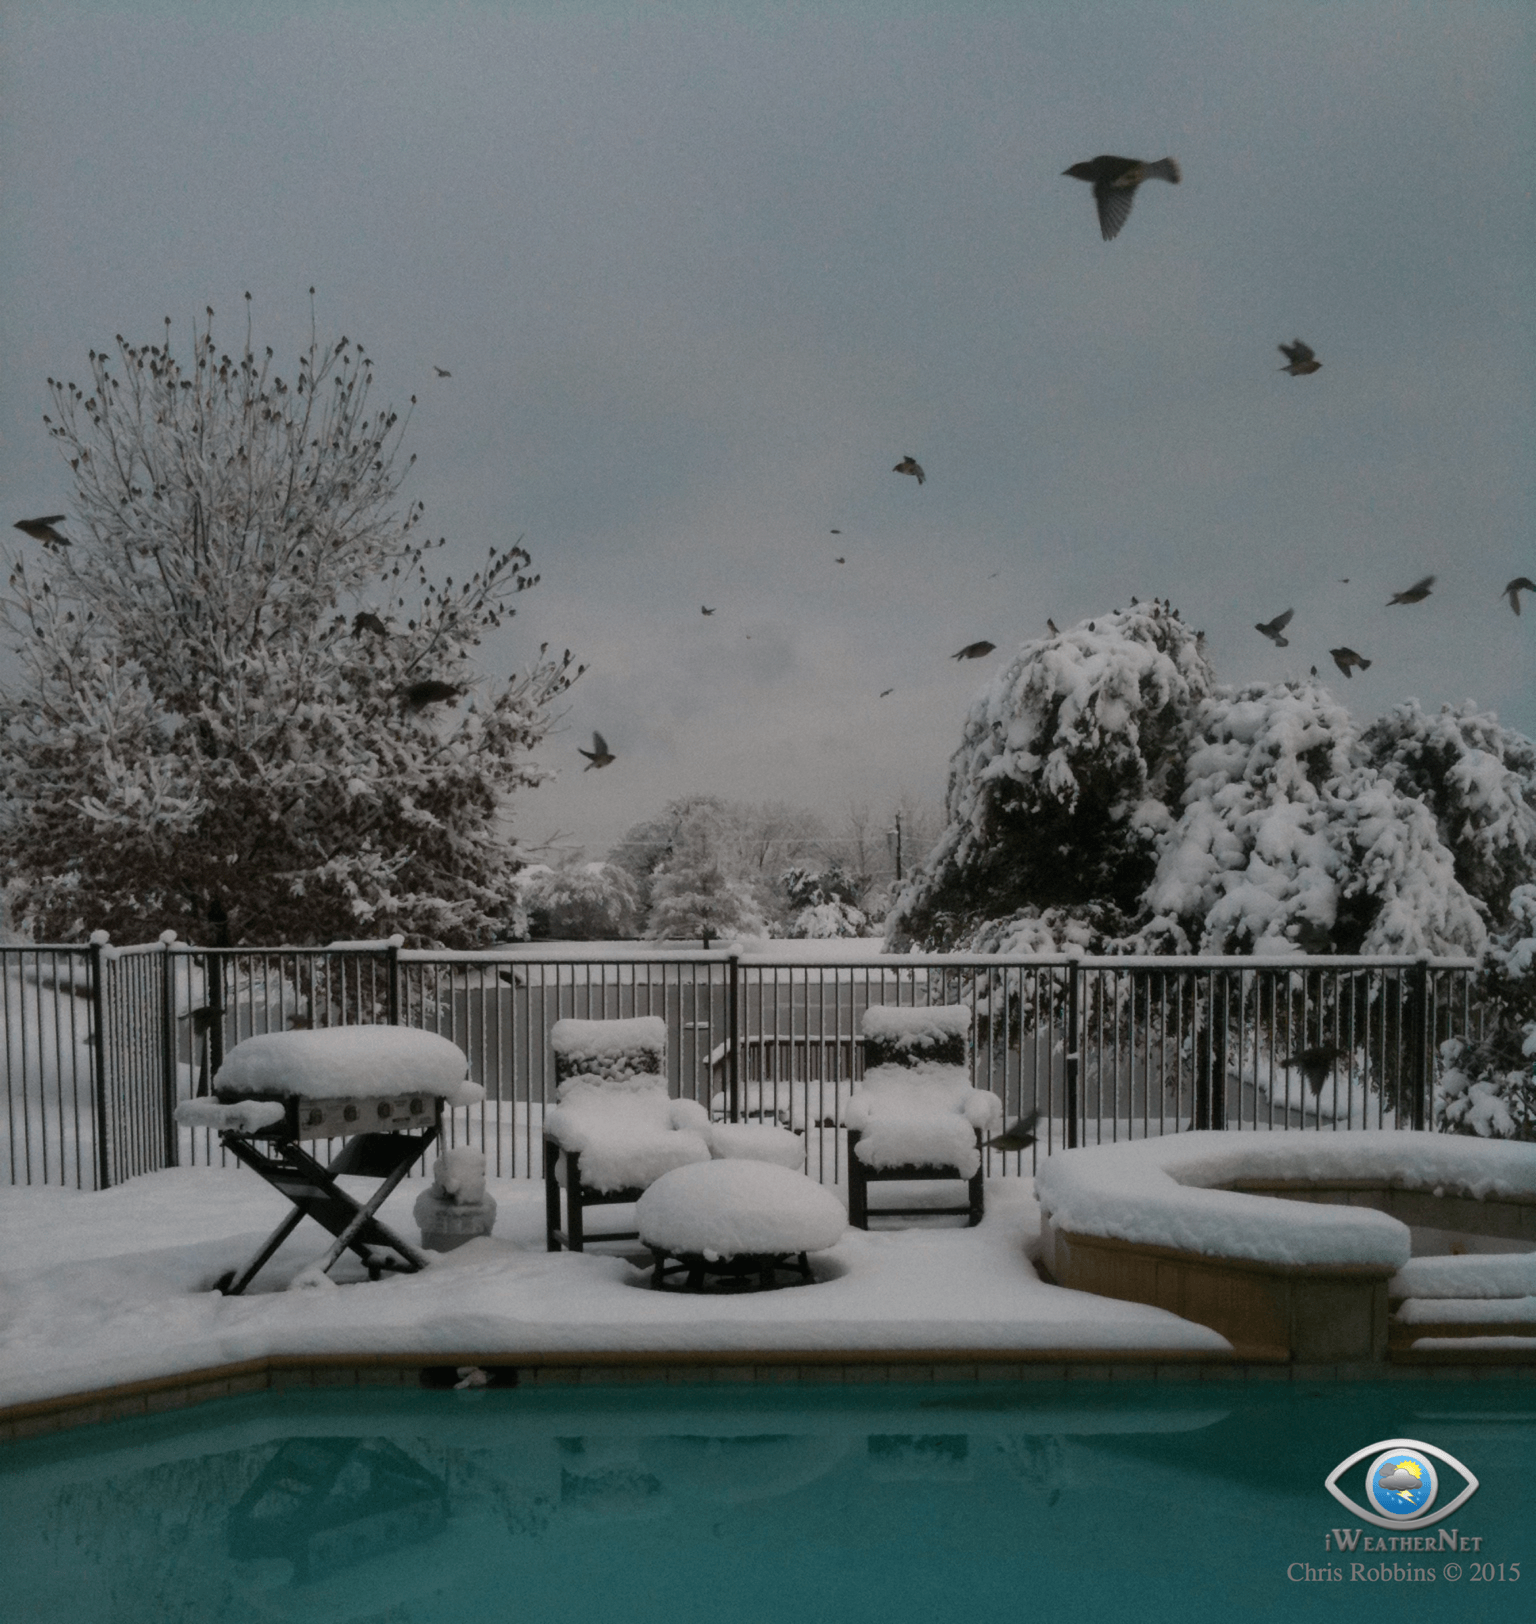 Historic snowstorm in North Texas on 2/12/2010. DFW recorded its greatest 24-hour snowfall of all time (12.5").